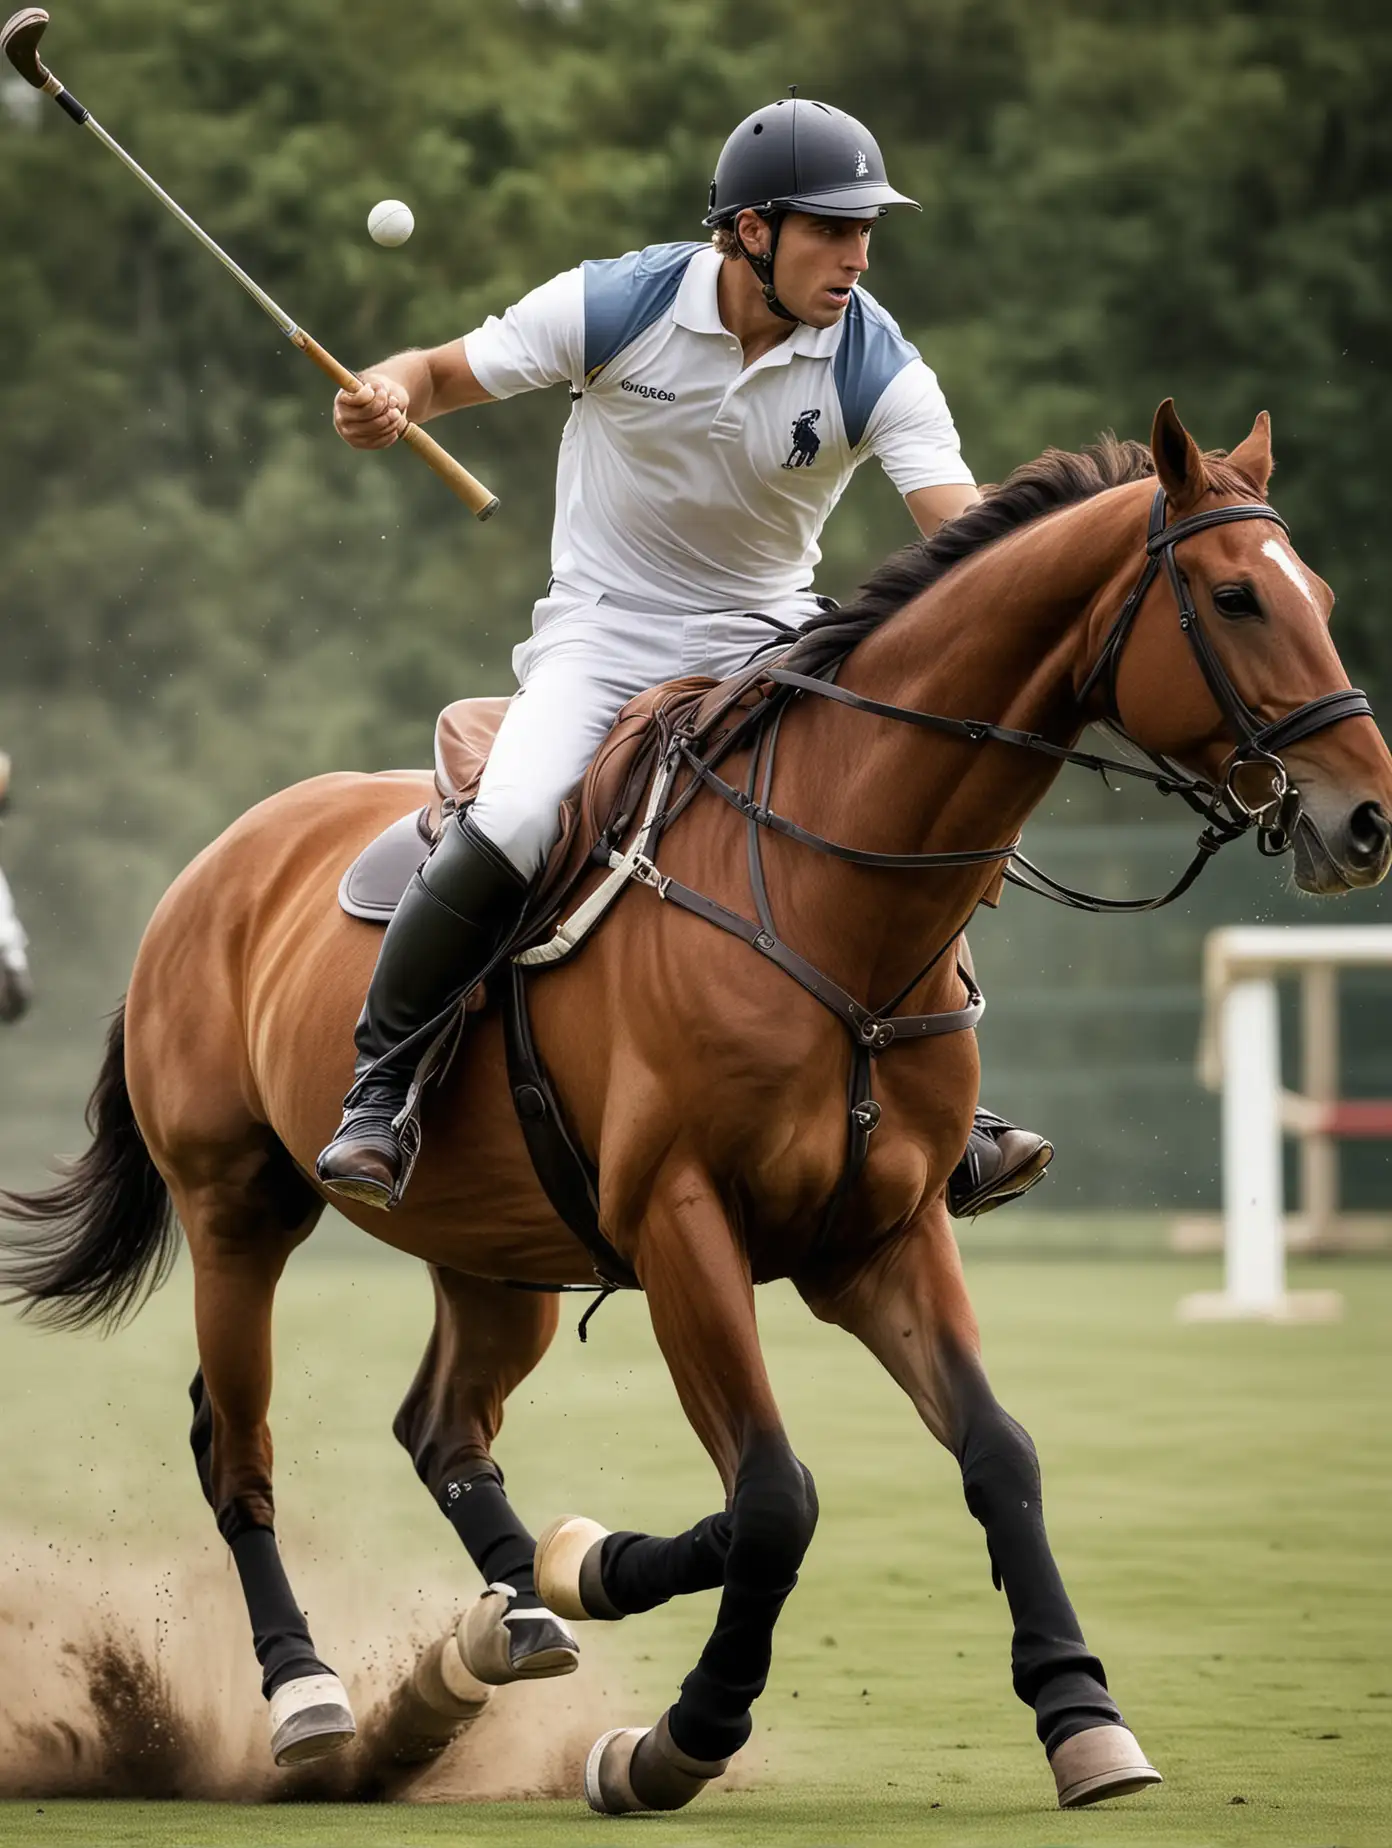 create an image of polo player going for the ball on the horse